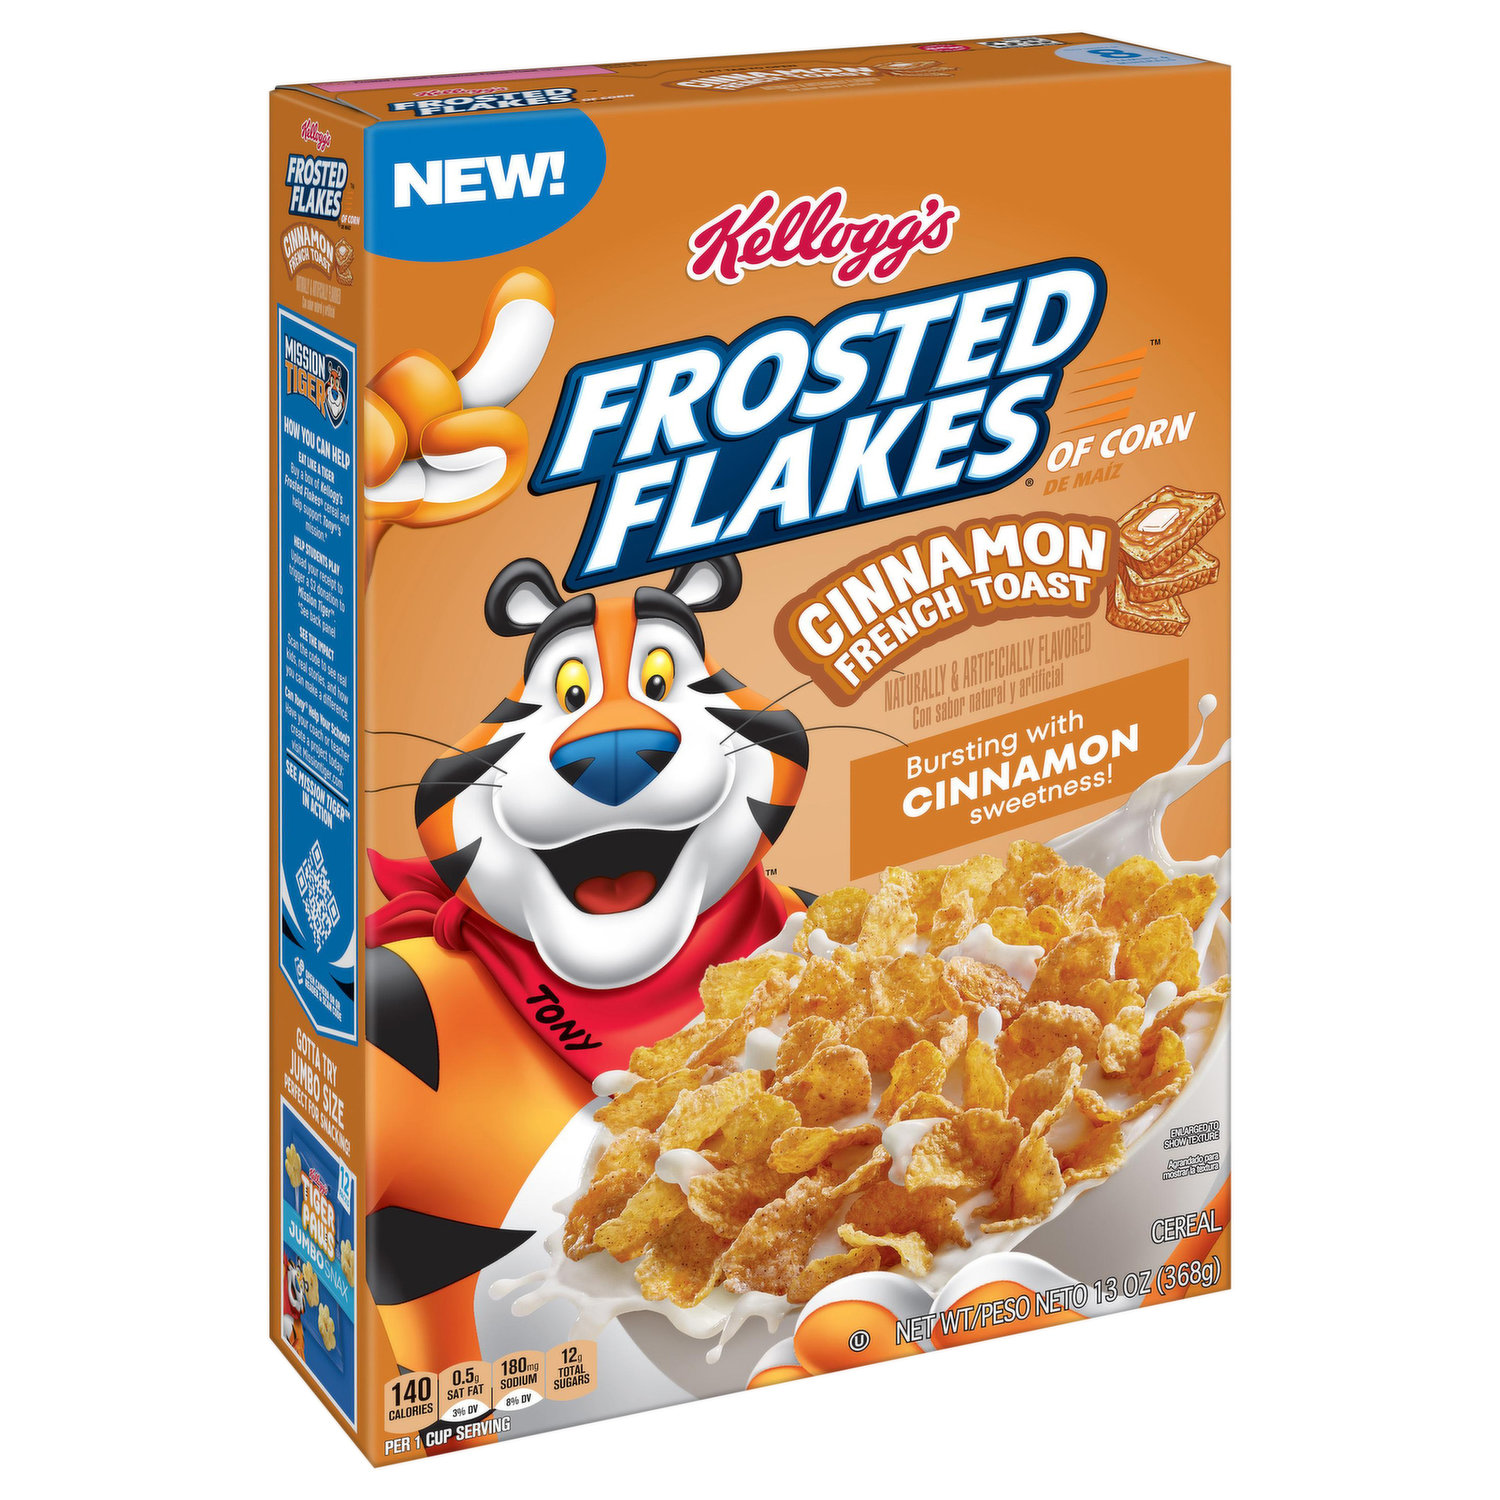 Kellogg's Frosted Flakes Honey Nut Breakfast Cereal, 13.7 oz